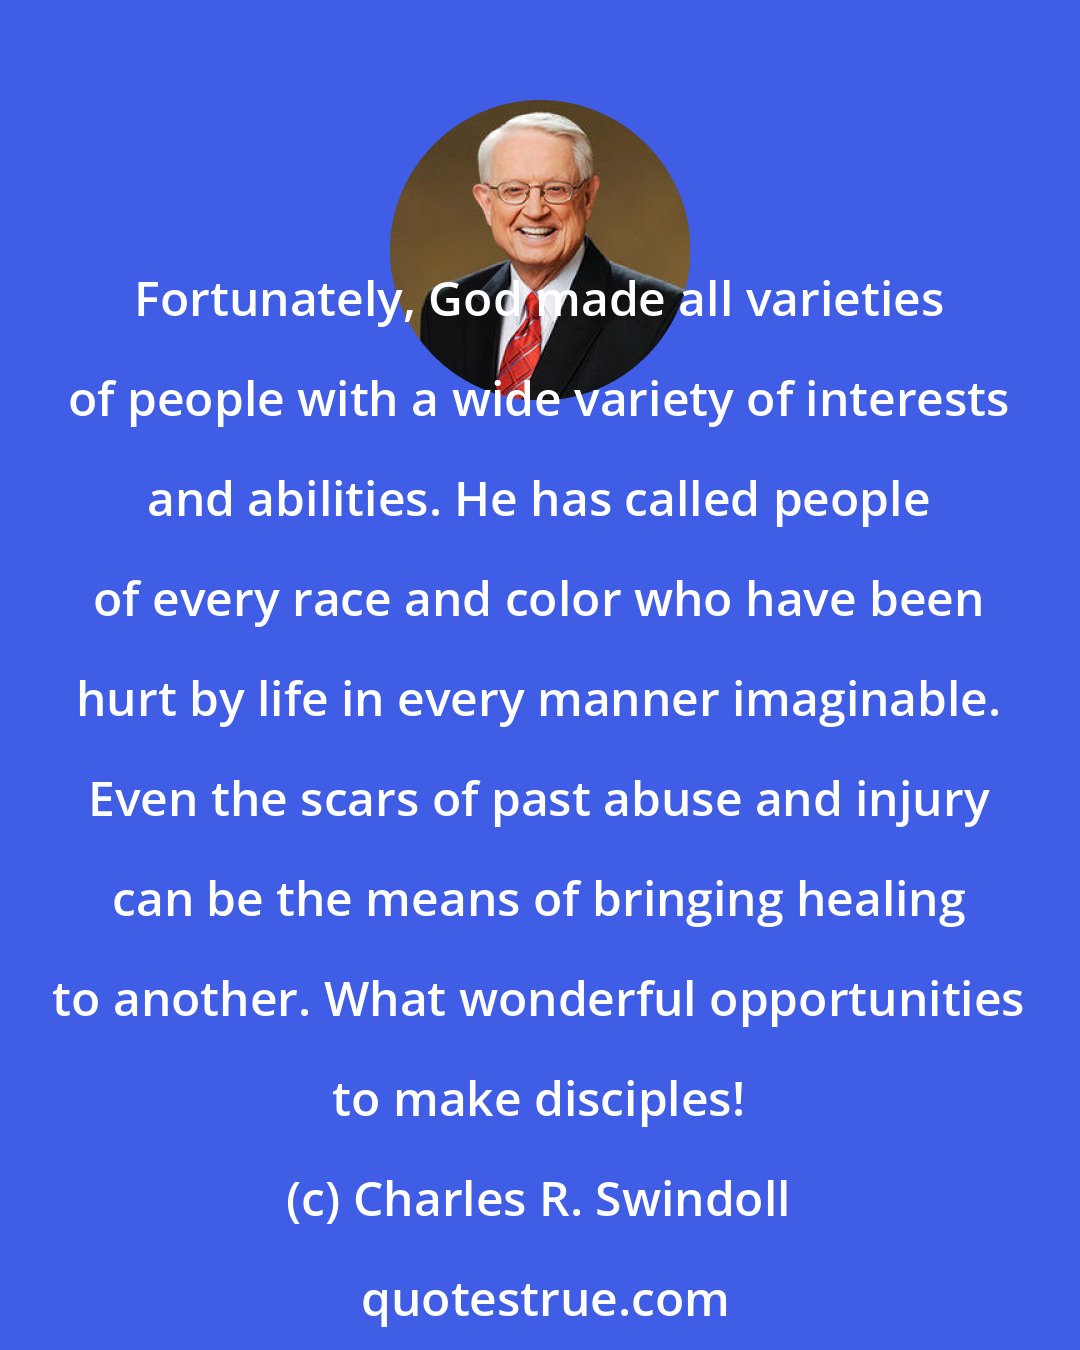 Charles R. Swindoll: Fortunately, God made all varieties of people with a wide variety of interests and abilities. He has called people of every race and color who have been hurt by life in every manner imaginable. Even the scars of past abuse and injury can be the means of bringing healing to another. What wonderful opportunities to make disciples!